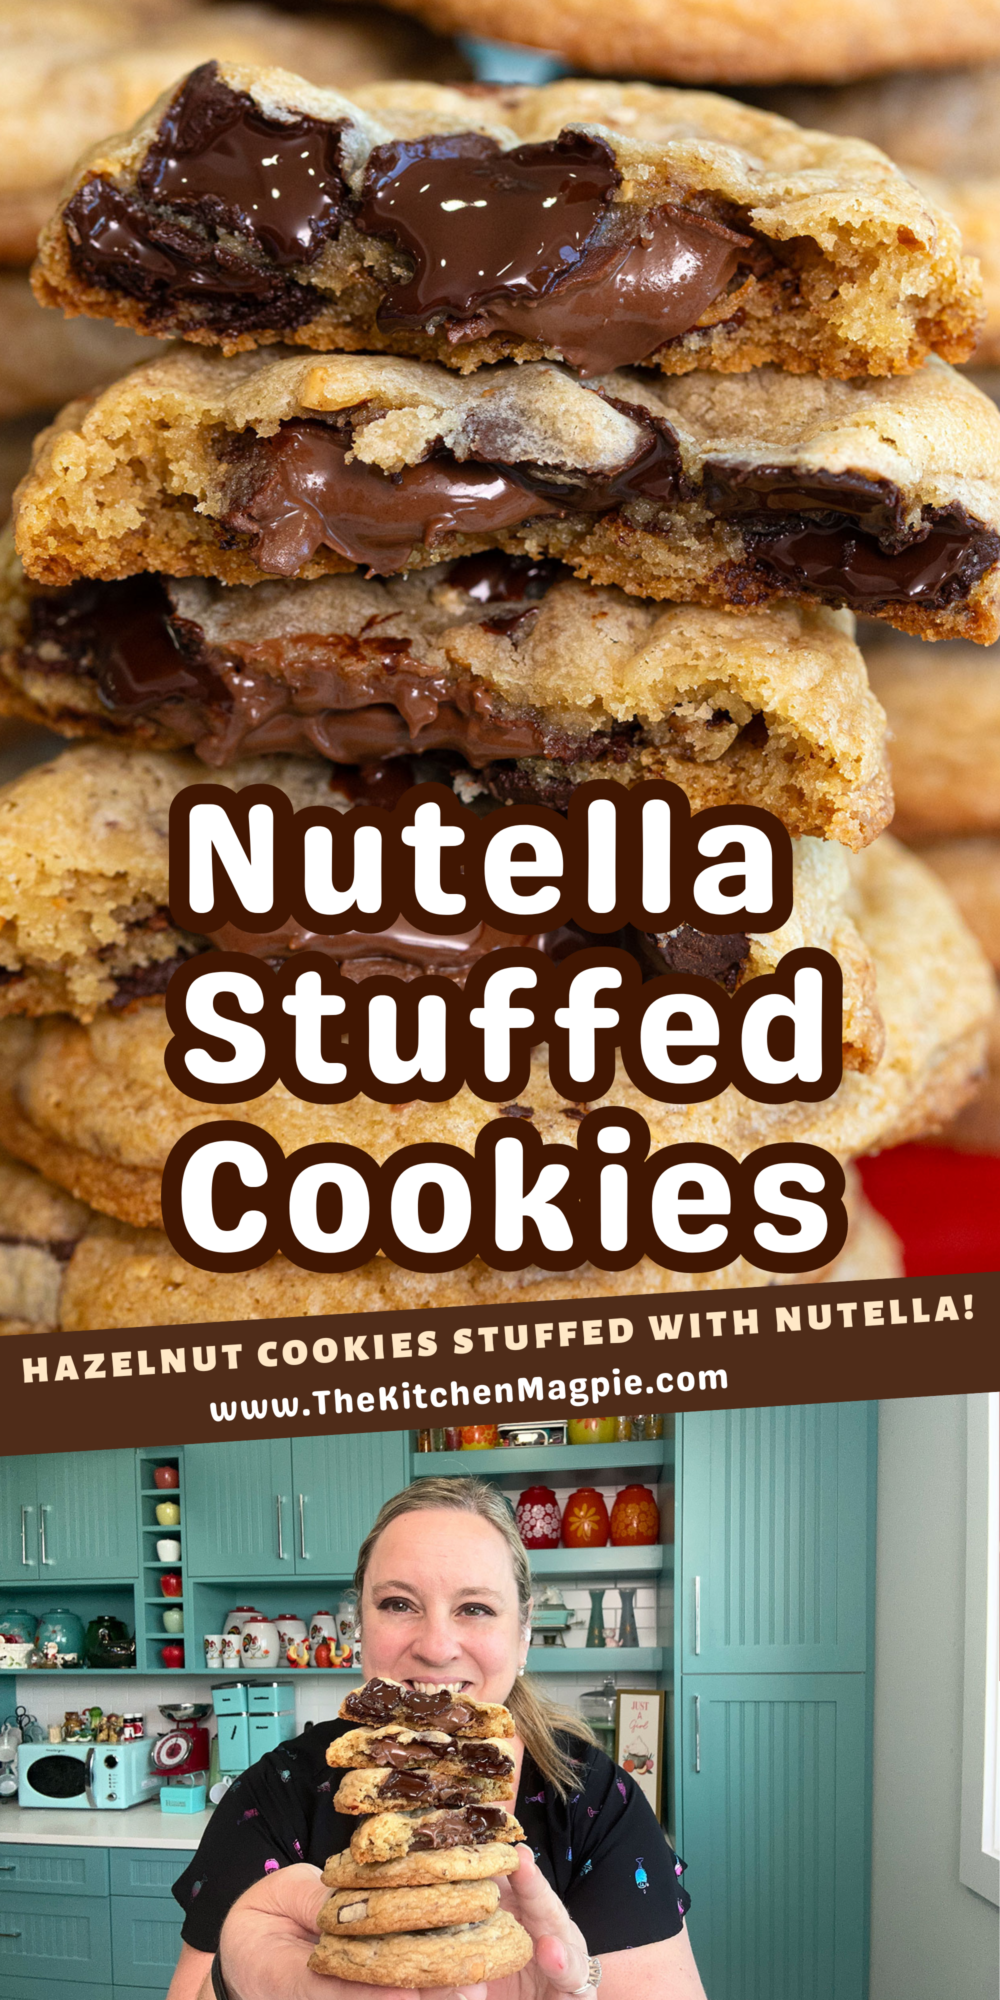 Hazelnut chocolate chip cookies are made even more decadent and delicious by filling the middle of the cookies with Nutella!